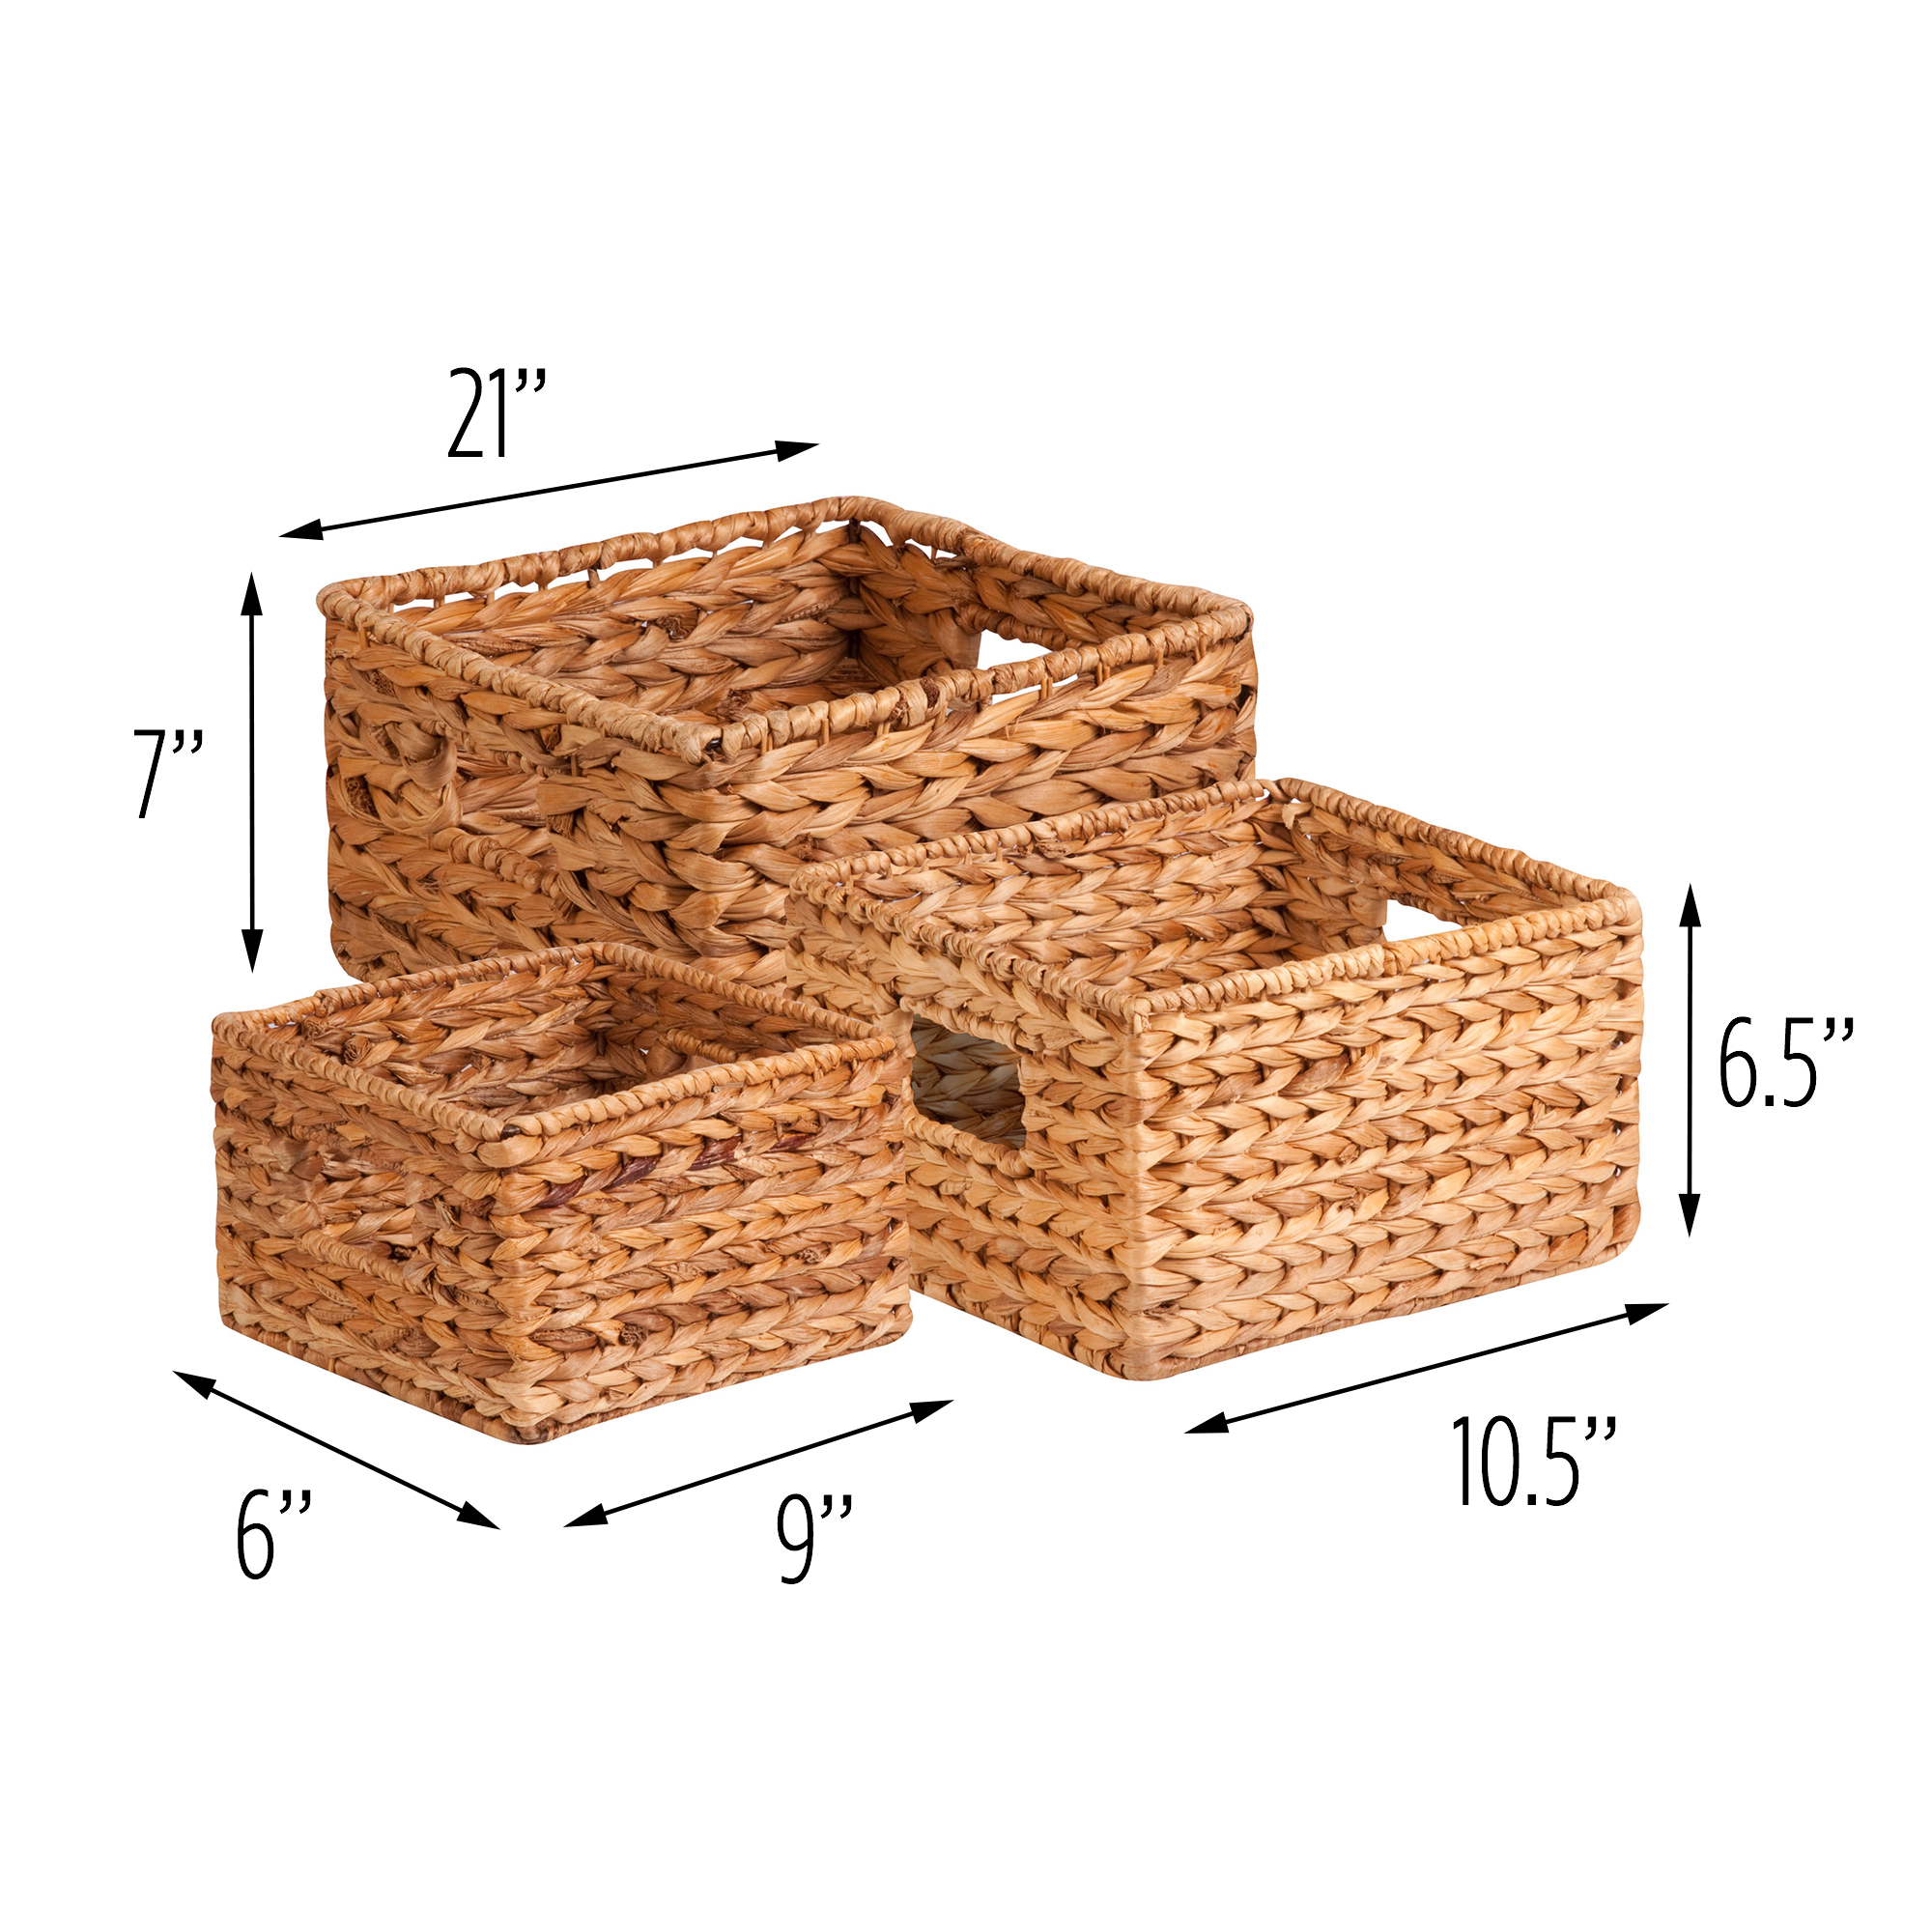 Honey-Can-Do Set of 3 Wicker Storage Nesting Baskets with Handles - image 5 of 5